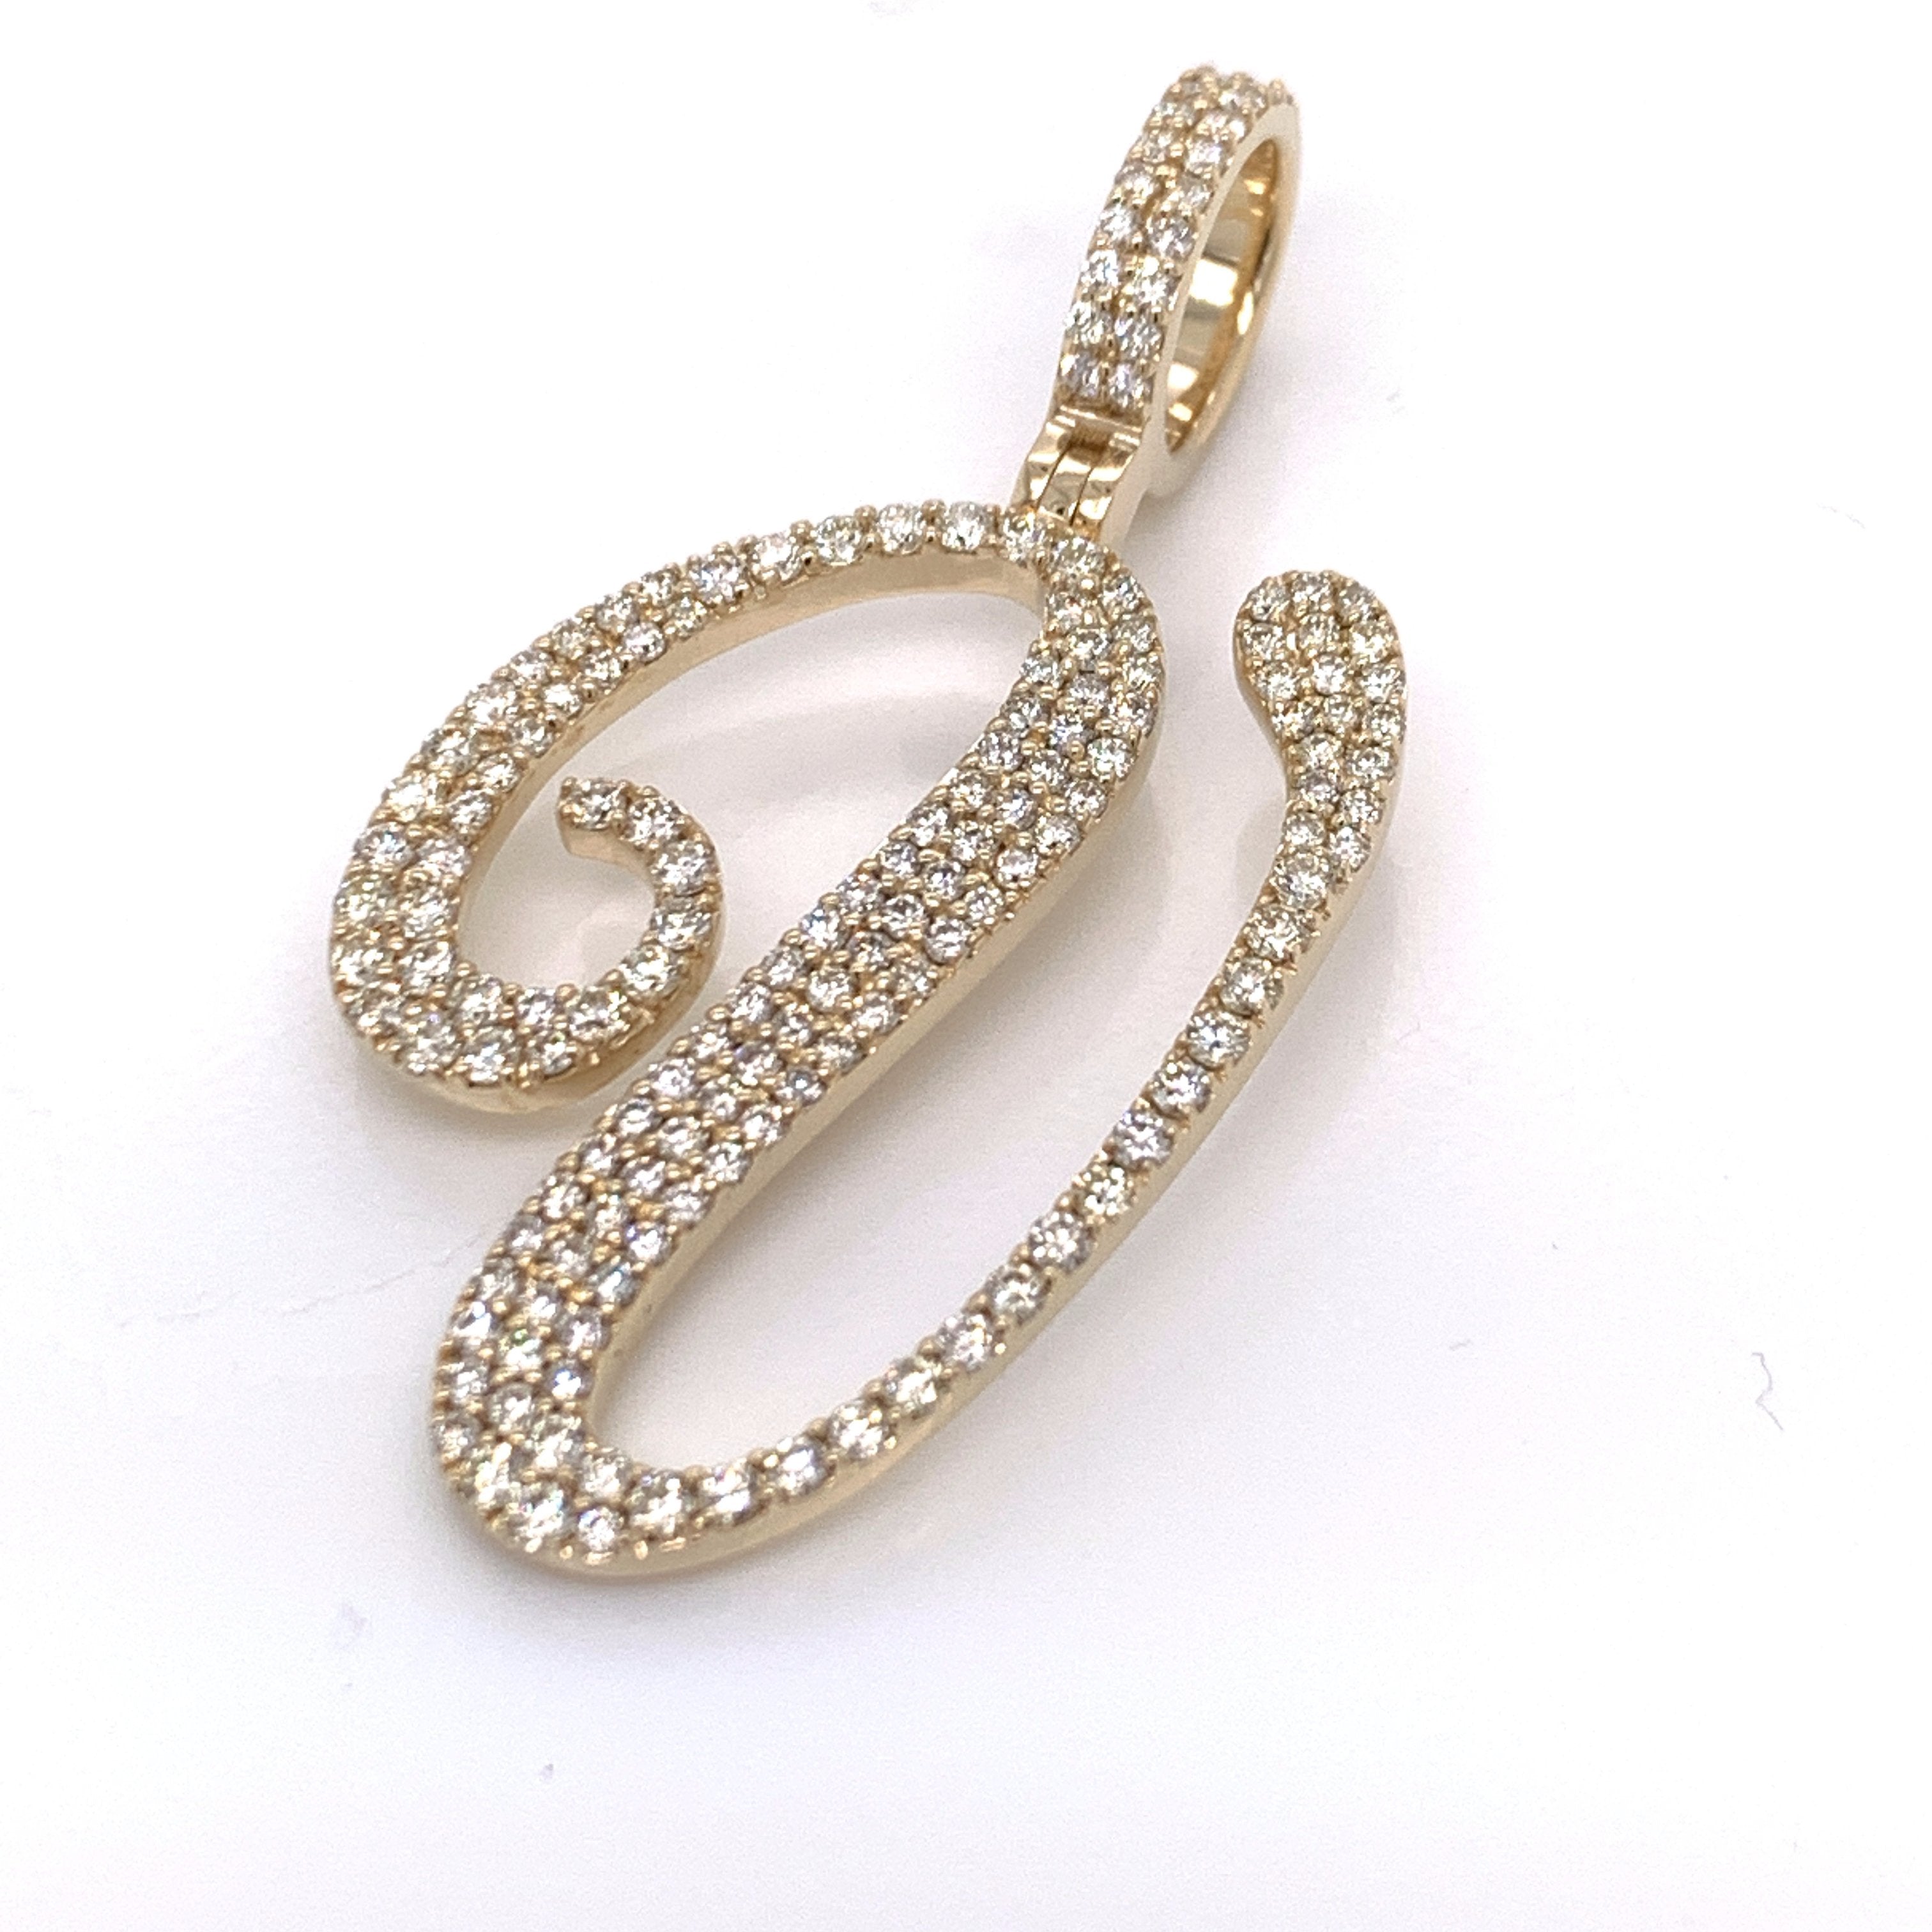 2.50 CT. Diamond Initial "V" Pendant in Gold With Chain - White Carat Diamonds 